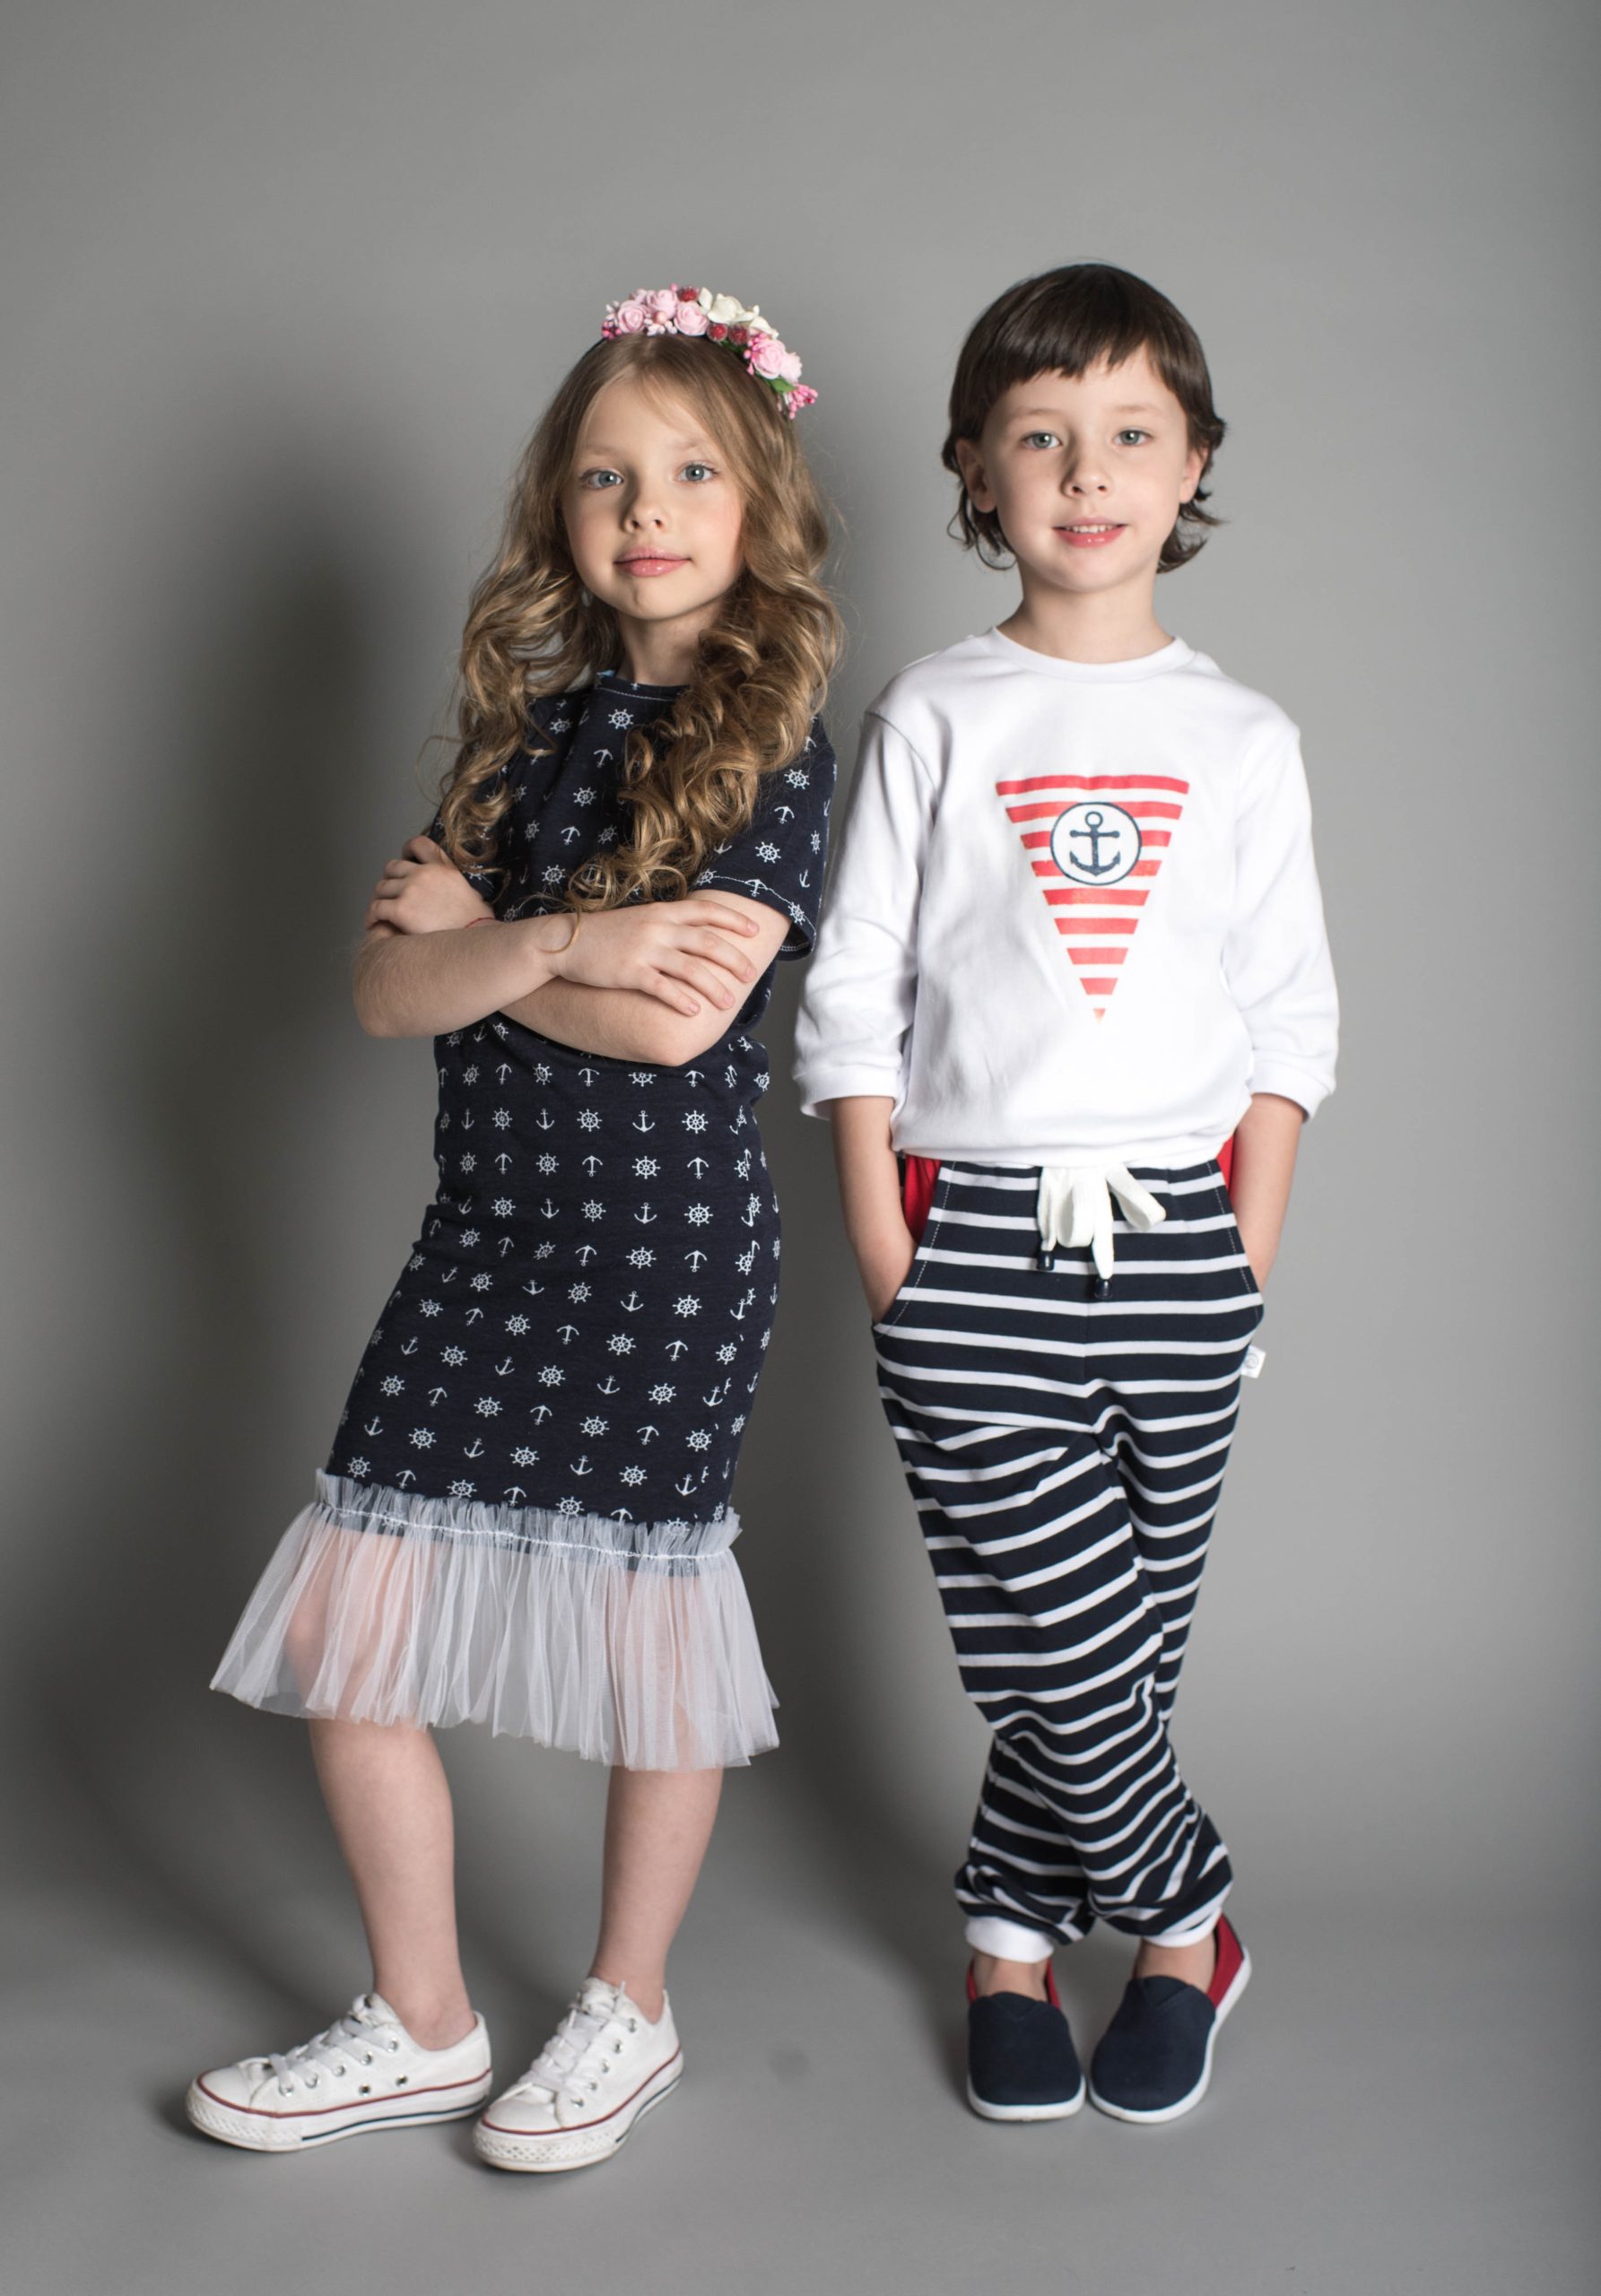 A Guide To Helping Your Child Express Themselves Through Clothing